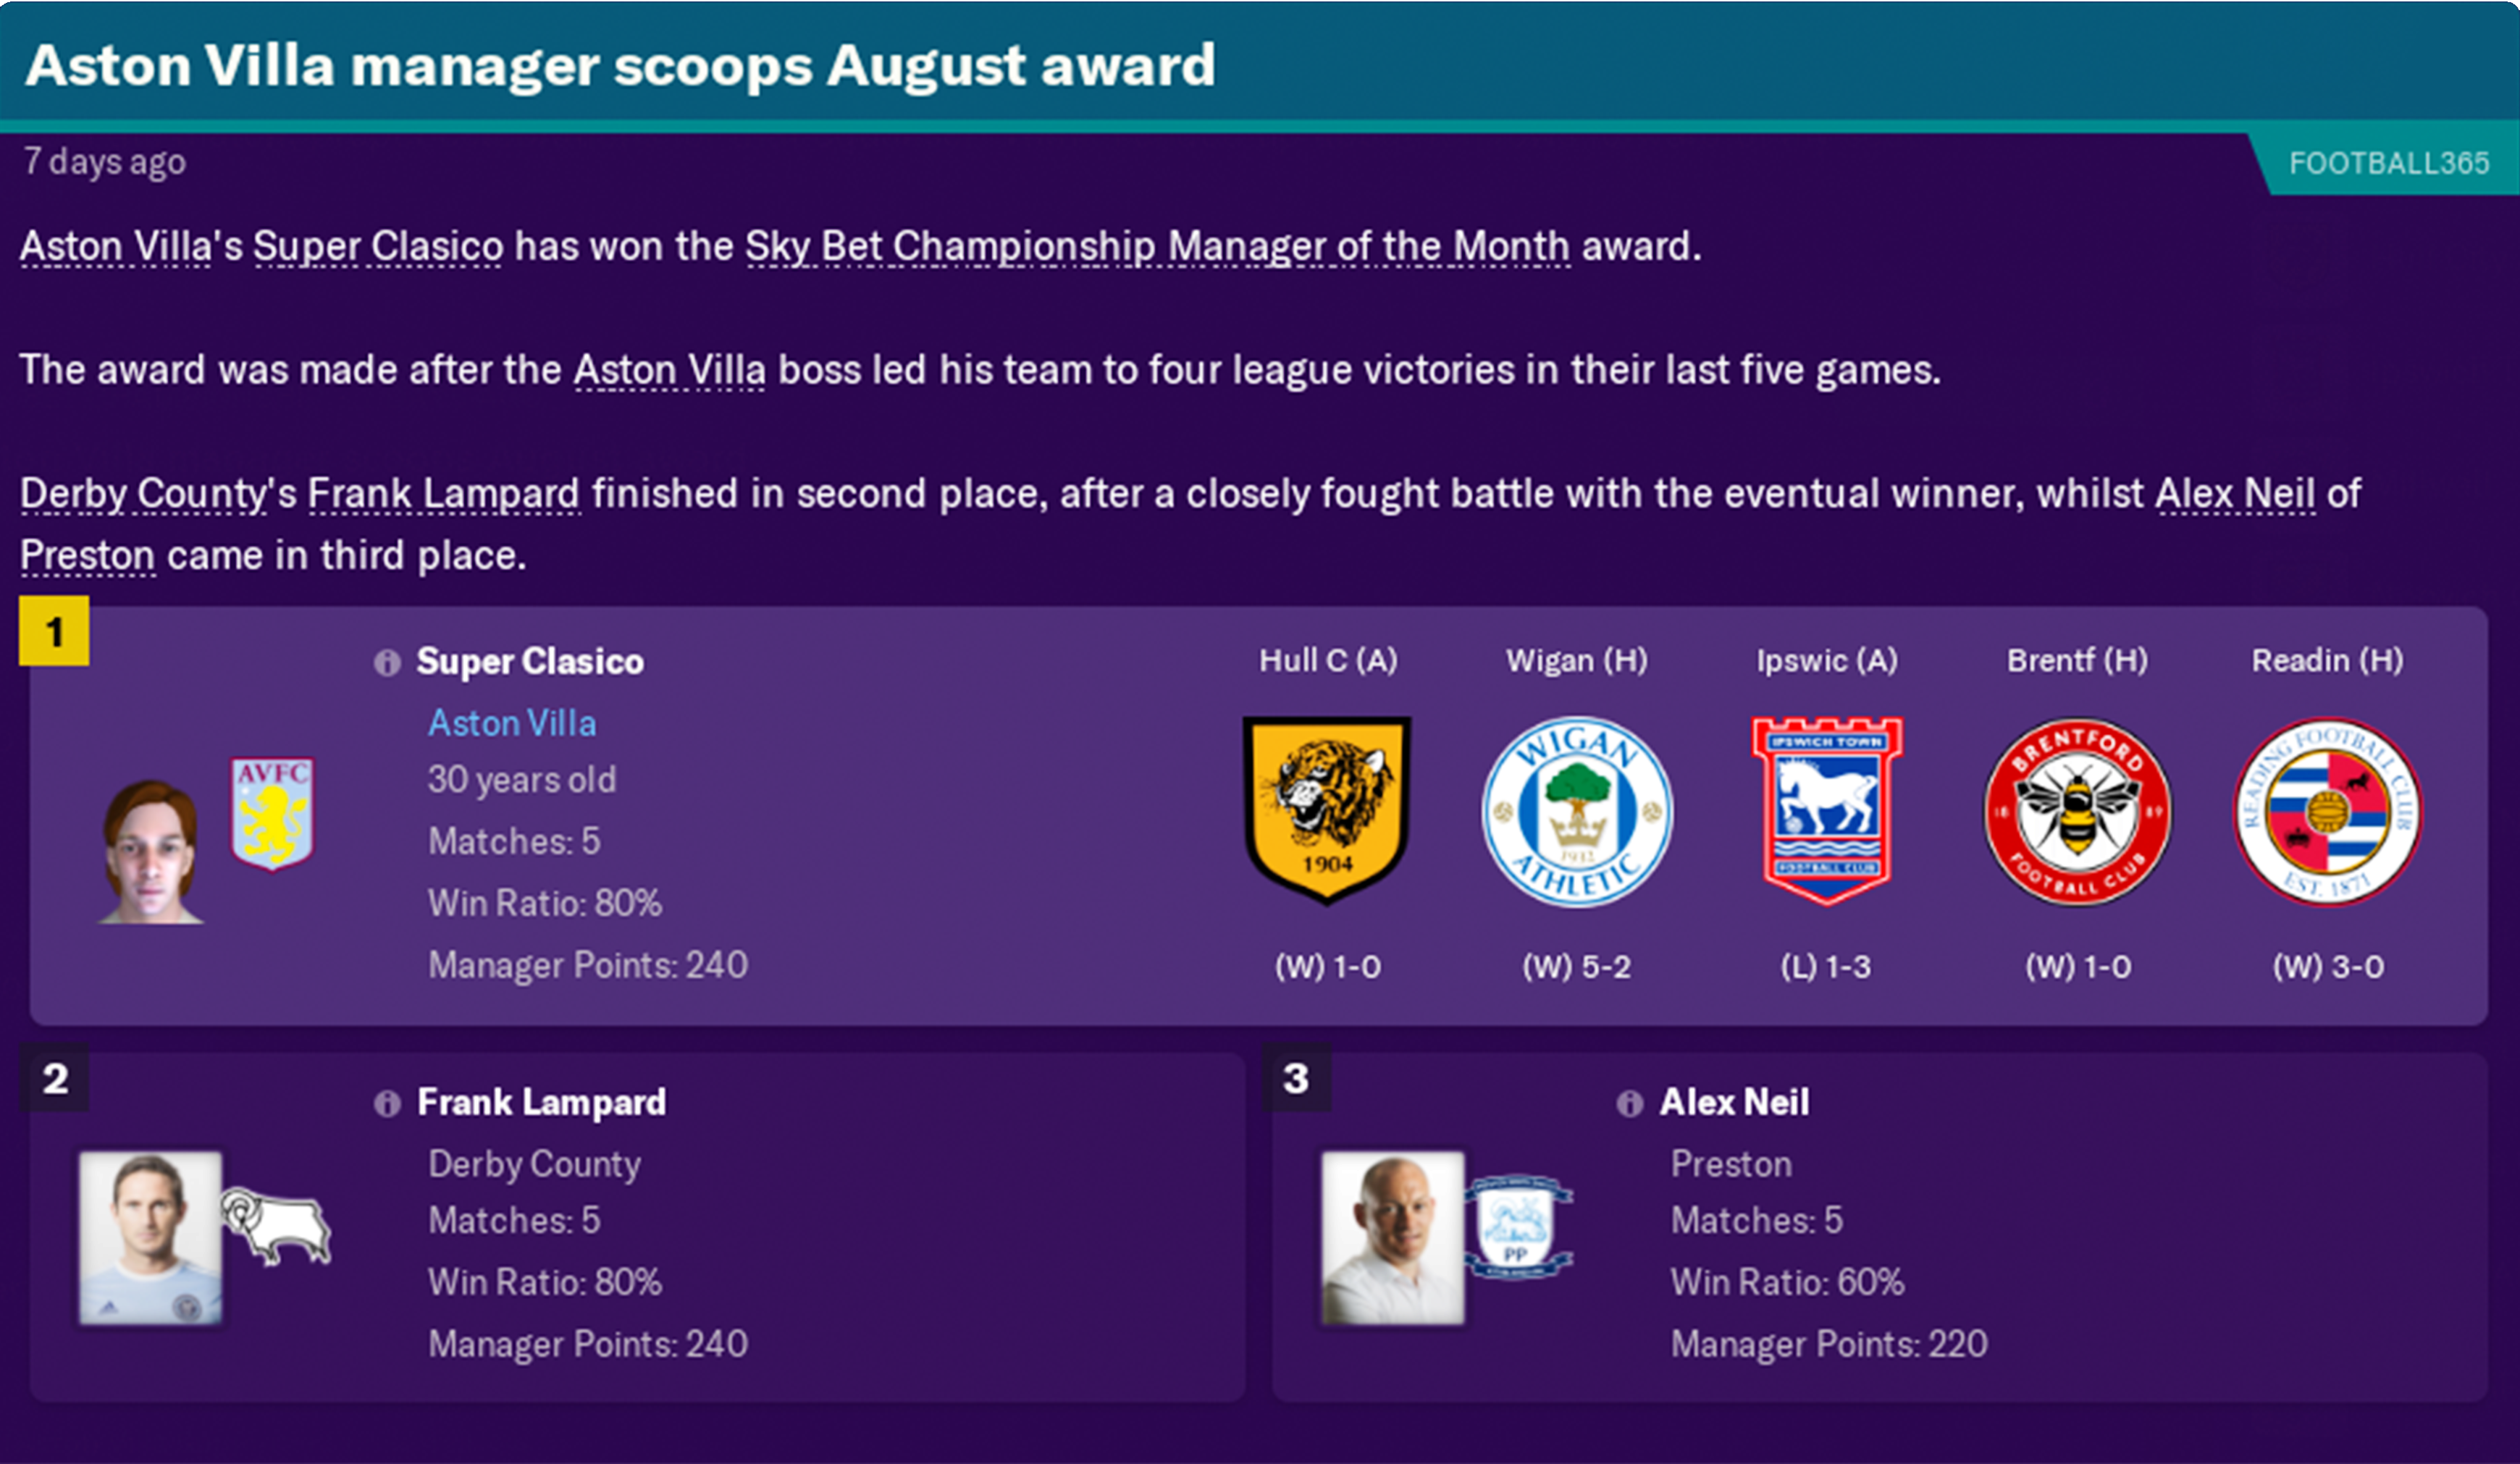 https://superclasicofc.files.wordpress.com/2018/11/manager-of-the-month1.png